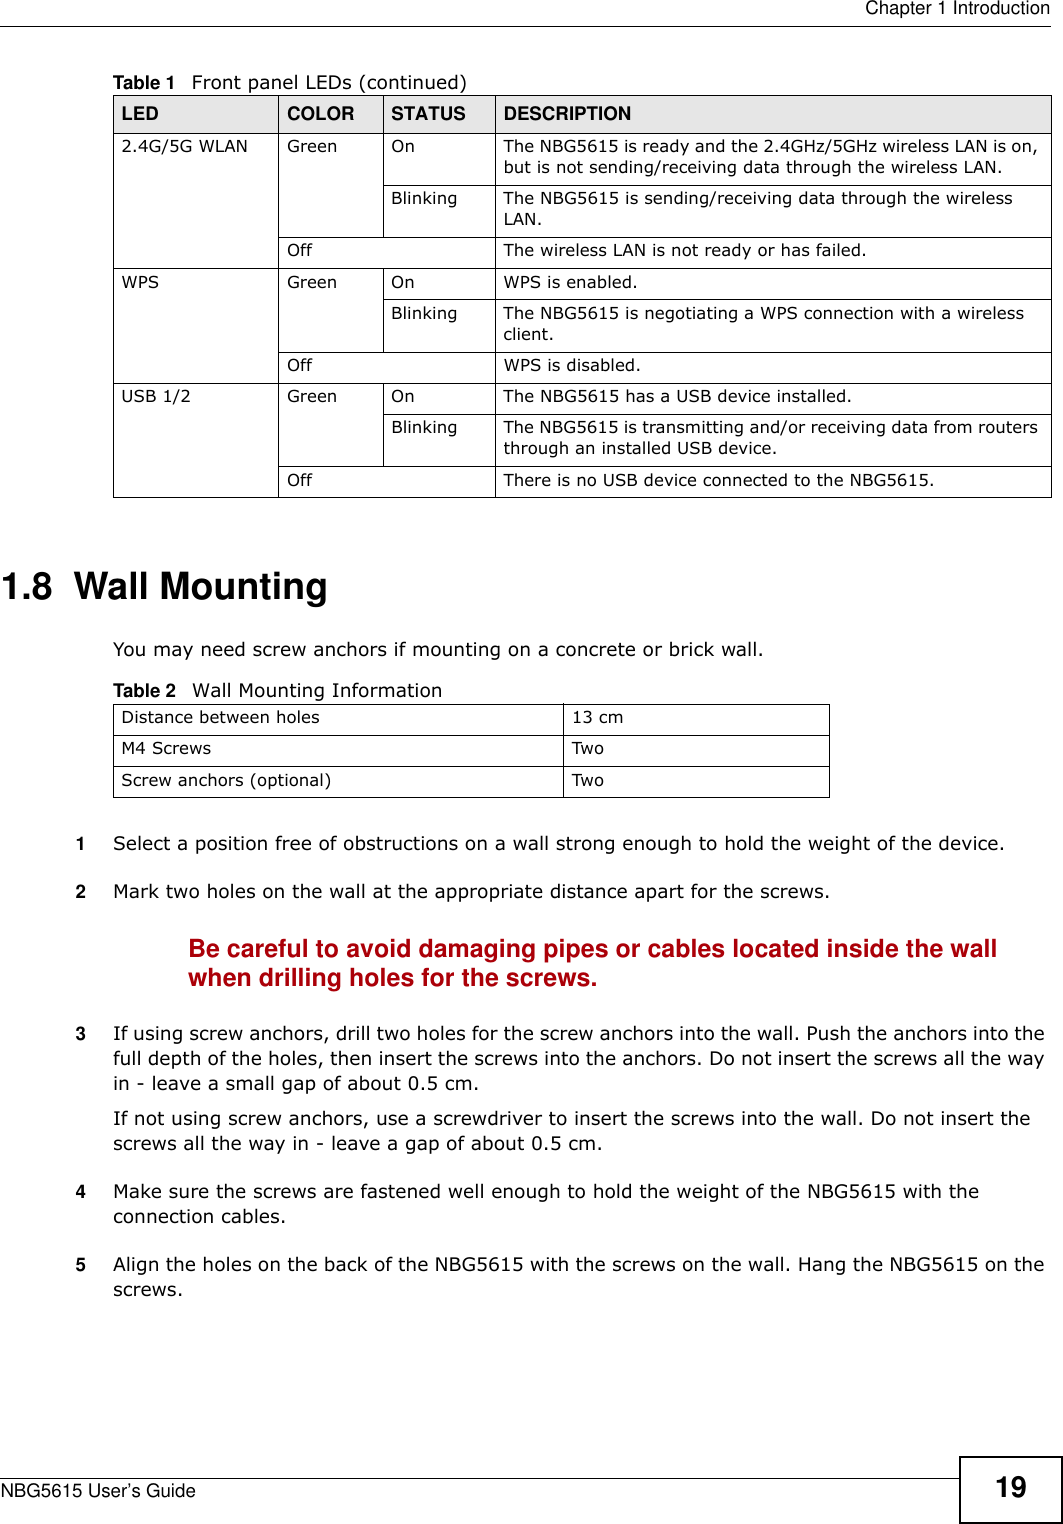  Chapter 1 IntroductionNBG5615 User’s Guide 191.8  Wall MountingYou may need screw anchors if mounting on a concrete or brick wall.1Select a position free of obstructions on a wall strong enough to hold the weight of the device. 2Mark two holes on the wall at the appropriate distance apart for the screws.Be careful to avoid damaging pipes or cables located inside the wall when drilling holes for the screws.3If using screw anchors, drill two holes for the screw anchors into the wall. Push the anchors into the full depth of the holes, then insert the screws into the anchors. Do not insert the screws all the way in - leave a small gap of about 0.5 cm.If not using screw anchors, use a screwdriver to insert the screws into the wall. Do not insert the screws all the way in - leave a gap of about 0.5 cm.4Make sure the screws are fastened well enough to hold the weight of the NBG5615 with the connection cables. 5Align the holes on the back of the NBG5615 with the screws on the wall. Hang the NBG5615 on the screws.2.4G/5G WLAN Green On The NBG5615 is ready and the 2.4GHz/5GHz wireless LAN is on, but is not sending/receiving data through the wireless LAN. Blinking The NBG5615 is sending/receiving data through the wireless LAN.Off The wireless LAN is not ready or has failed.WPS Green On WPS is enabled.Blinking The NBG5615 is negotiating a WPS connection with a wireless client.Off WPS is disabled.USB 1/2 Green On The NBG5615 has a USB device installed.Blinking The NBG5615 is transmitting and/or receiving data from routers through an installed USB device.Off There is no USB device connected to the NBG5615.Table 1   Front panel LEDs (continued)LED COLOR STATUS DESCRIPTIONTable 2   Wall Mounting InformationDistance between holes 13 cmM4 Screws TwoScrew anchors (optional) Two